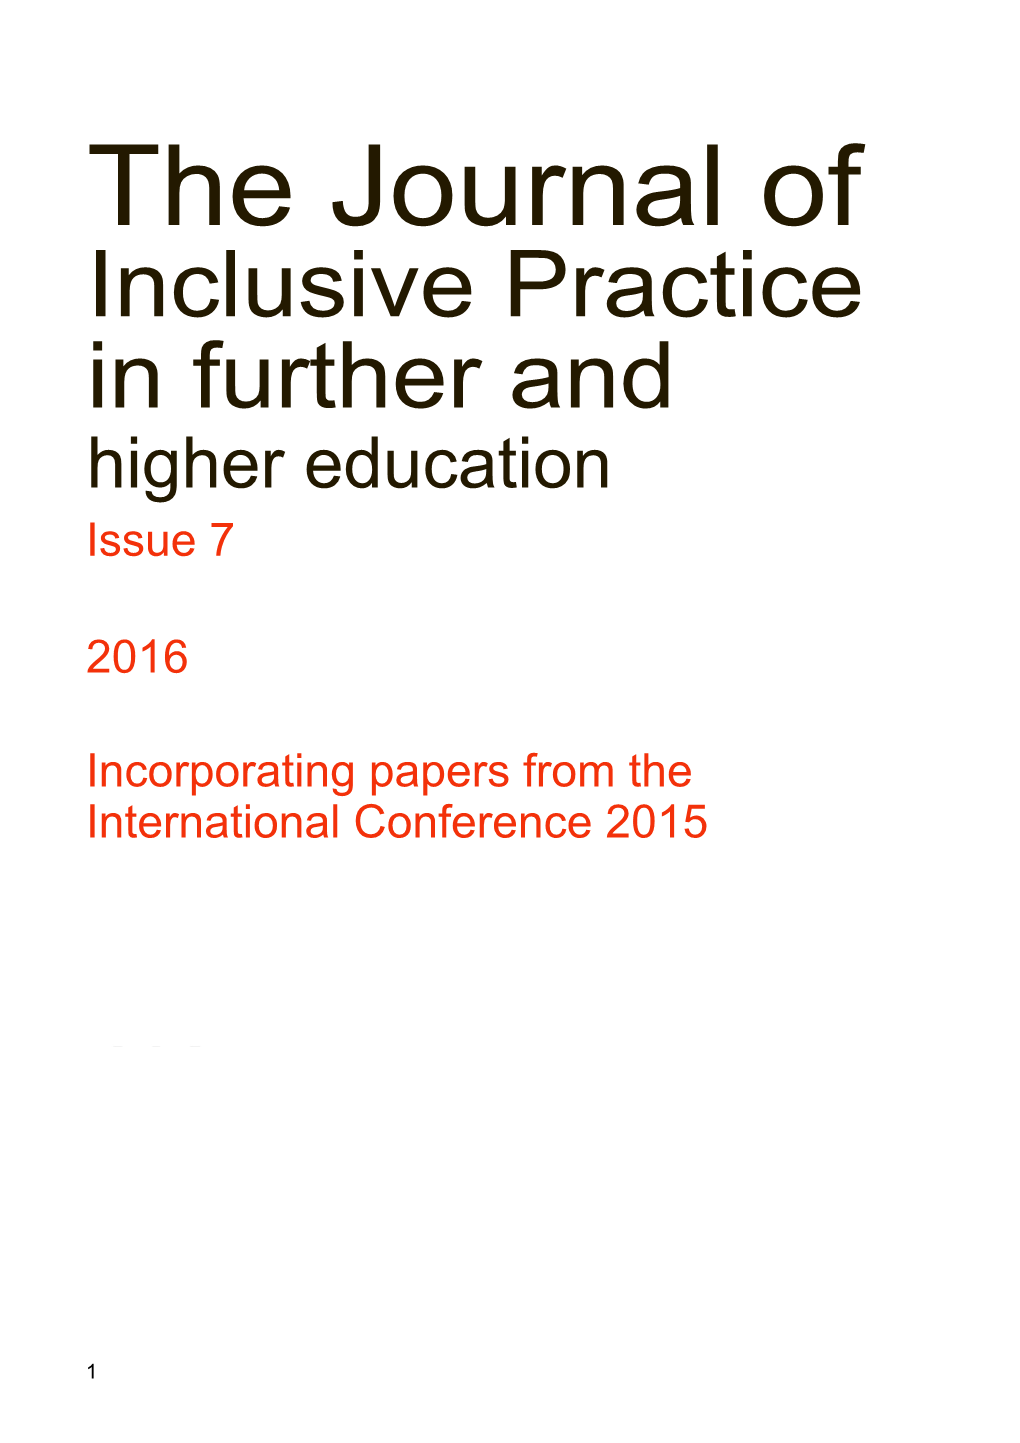 The Journal of Inclusive Practice in Further And